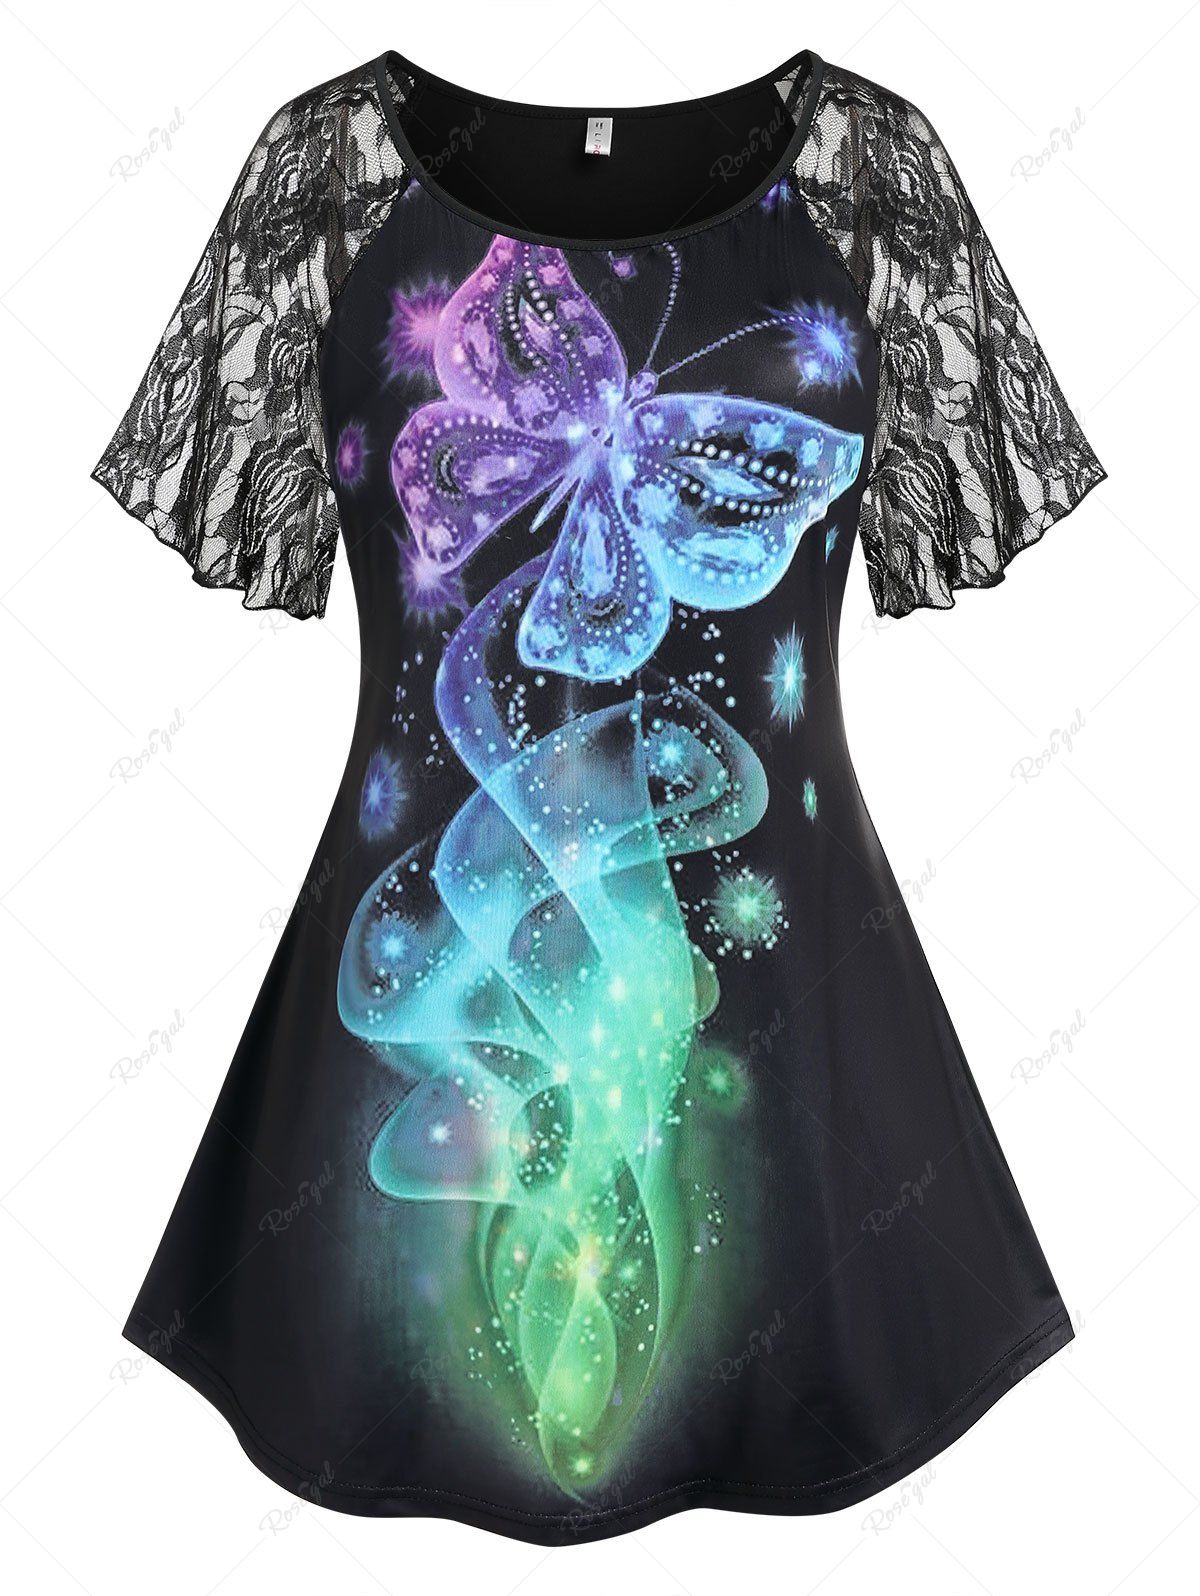 Chic Plus Size Butterfly Print Lace Raglan Sleeve T-shirt  